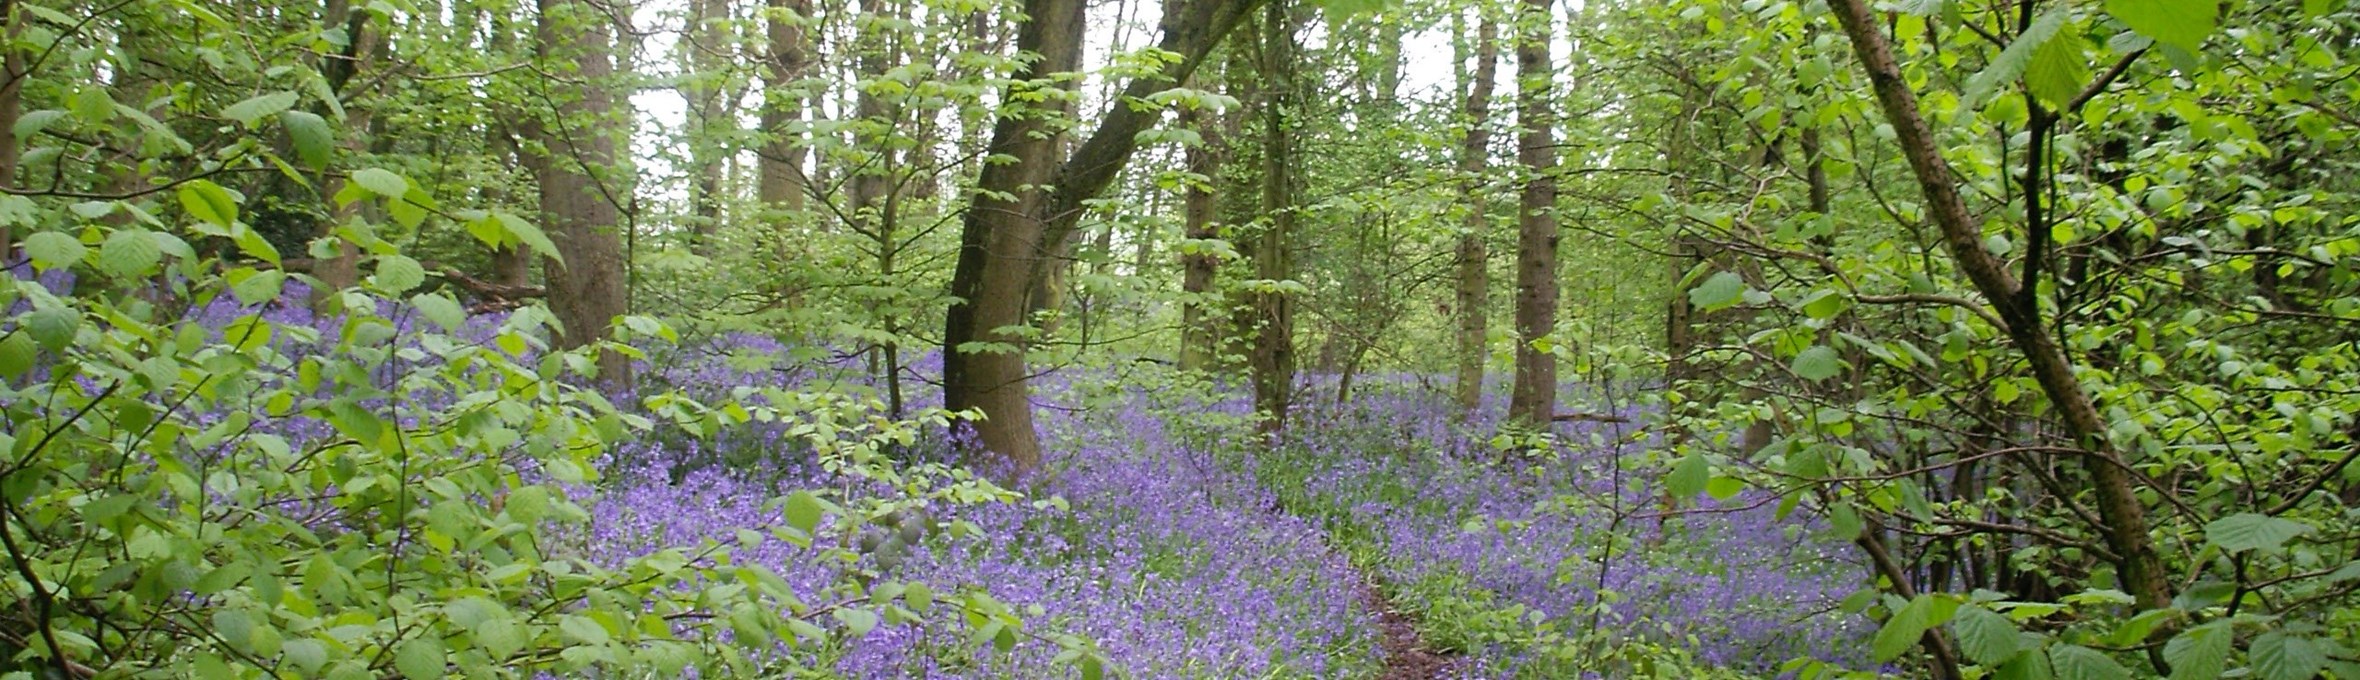 Woodland path leading between trees and bluebells